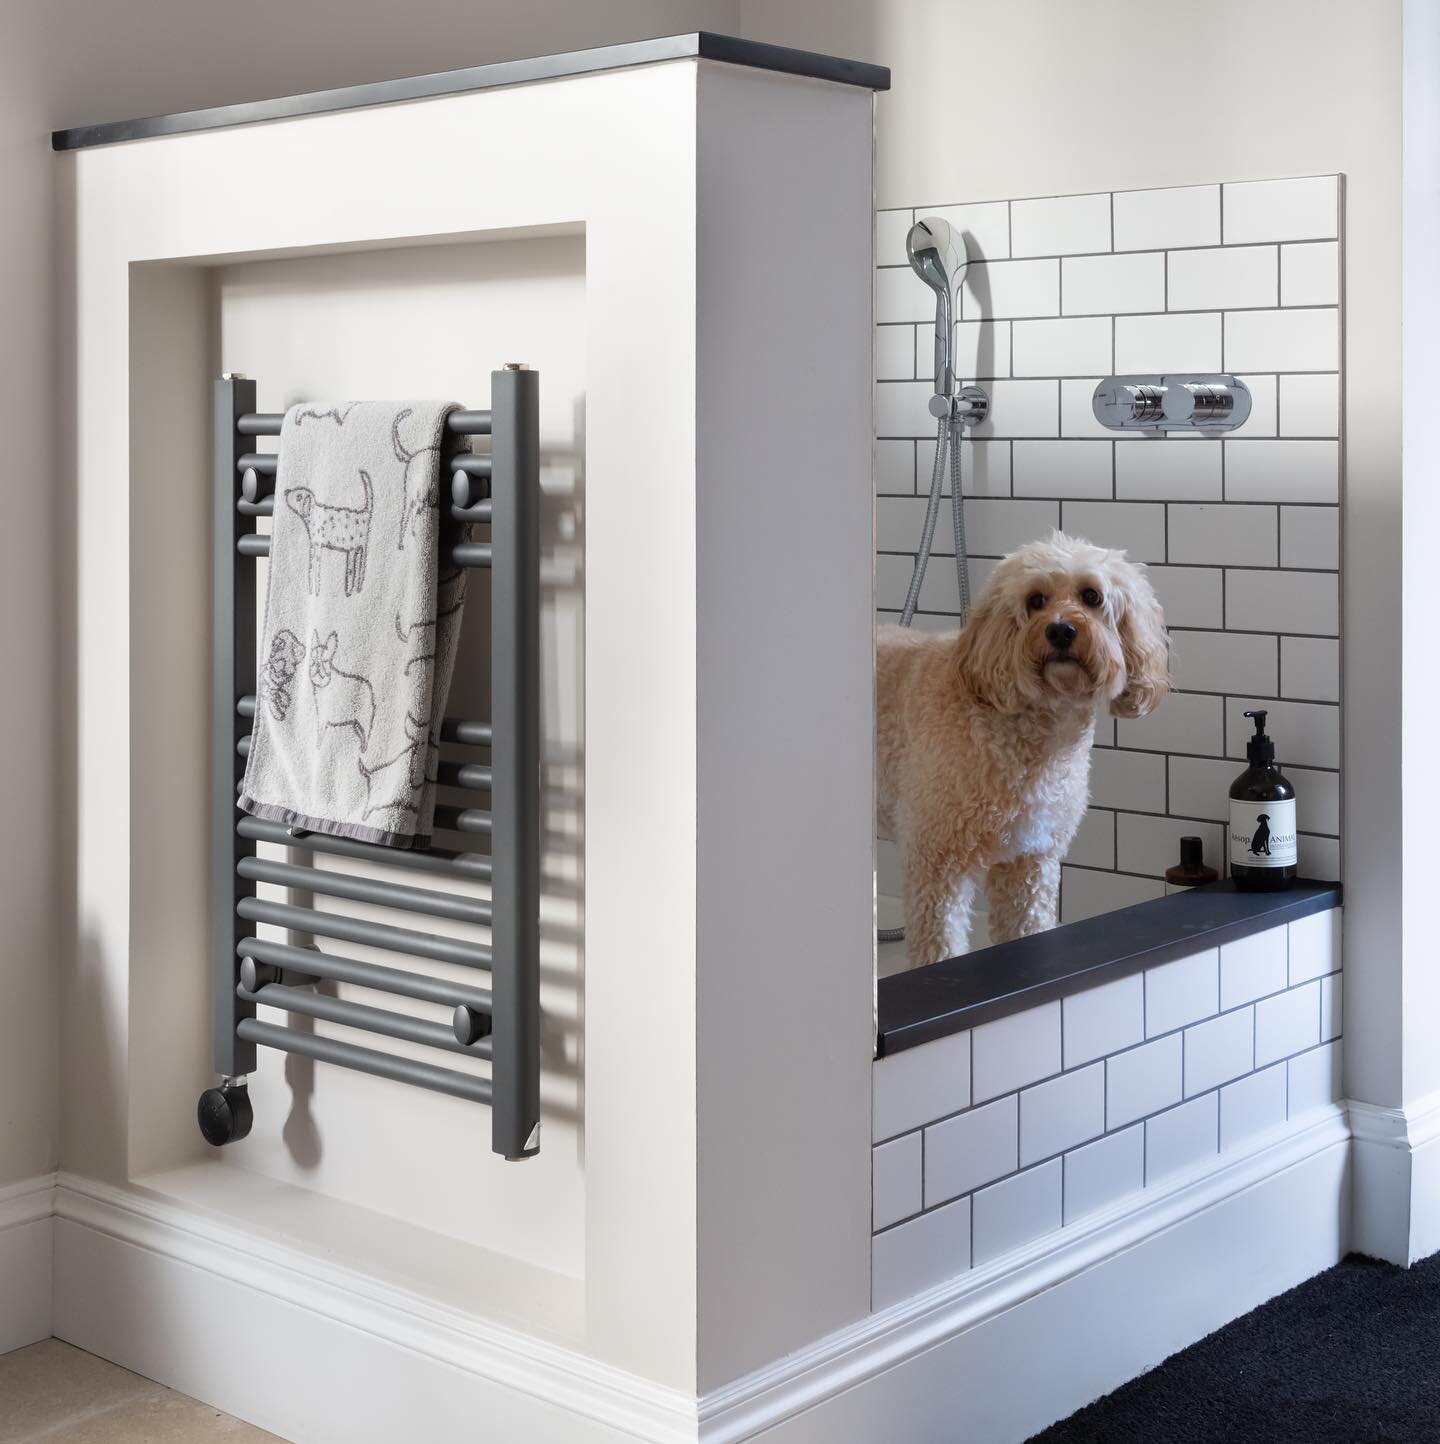 Every home should be tailored to each family members needs, including your pets! 

Hugo&rsquo;s dog shower here is a luxury but also extremely practical, not just for him but for his owners, now they no longer have to worry about muddy paw prints acr